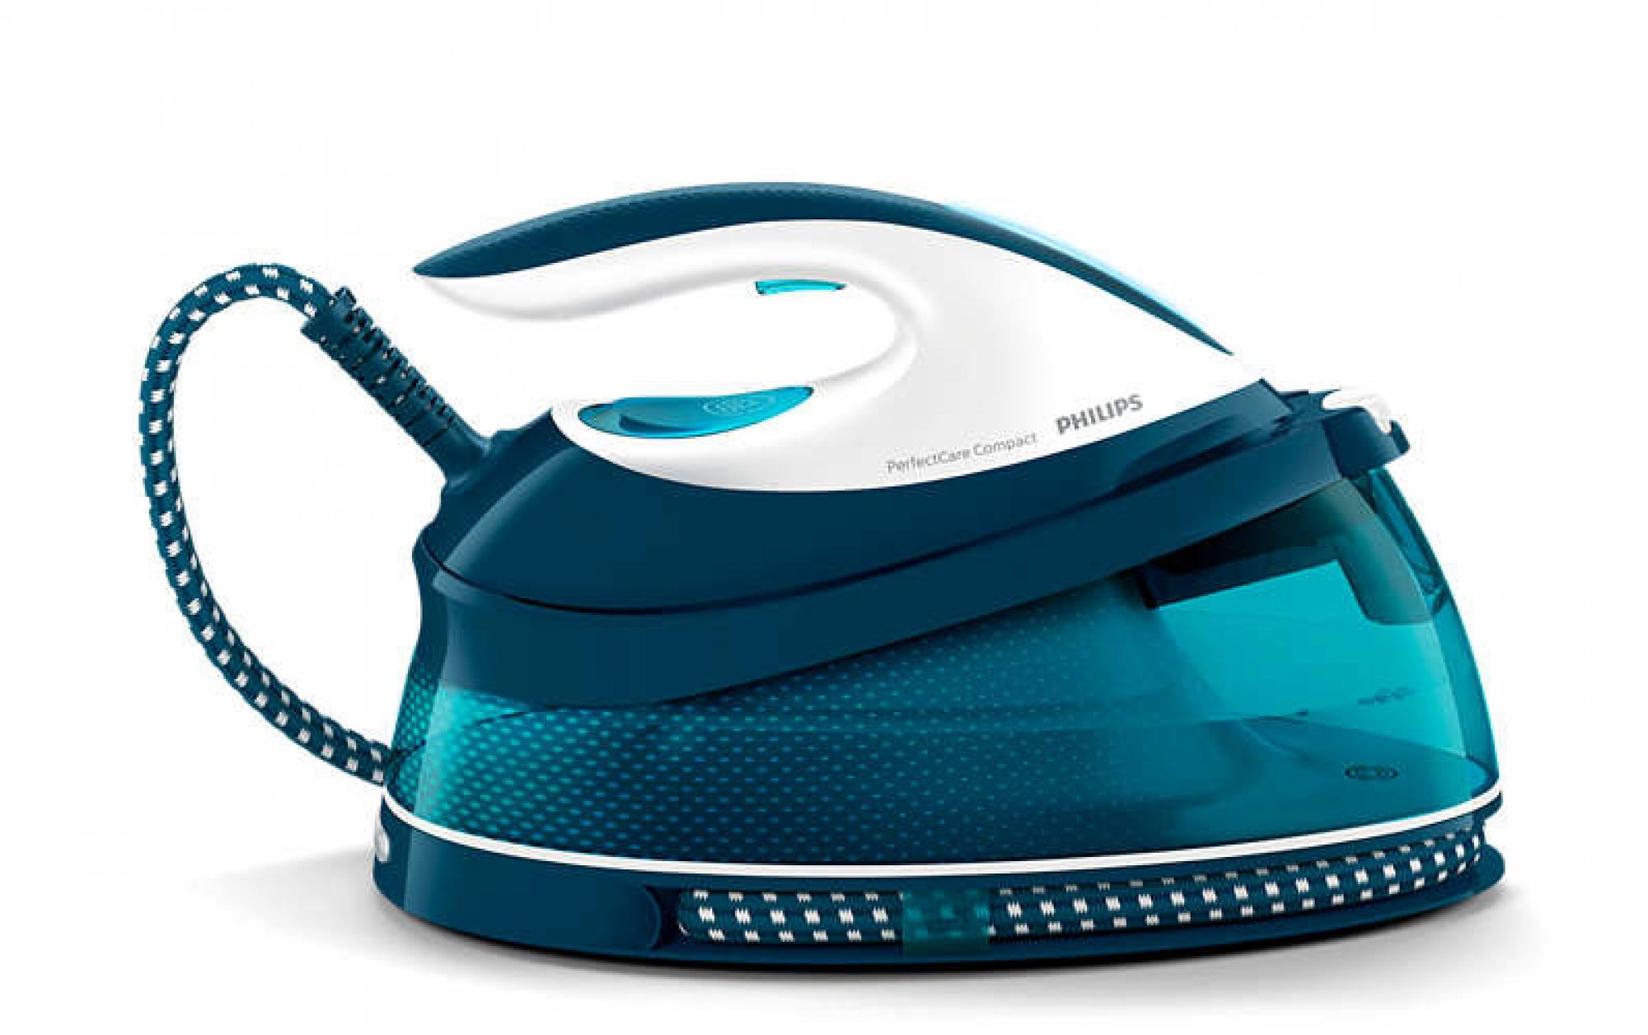 Selected image for Philips PerfectCare Compact GC7844 20 Parna stanica, 2400 W, Plava